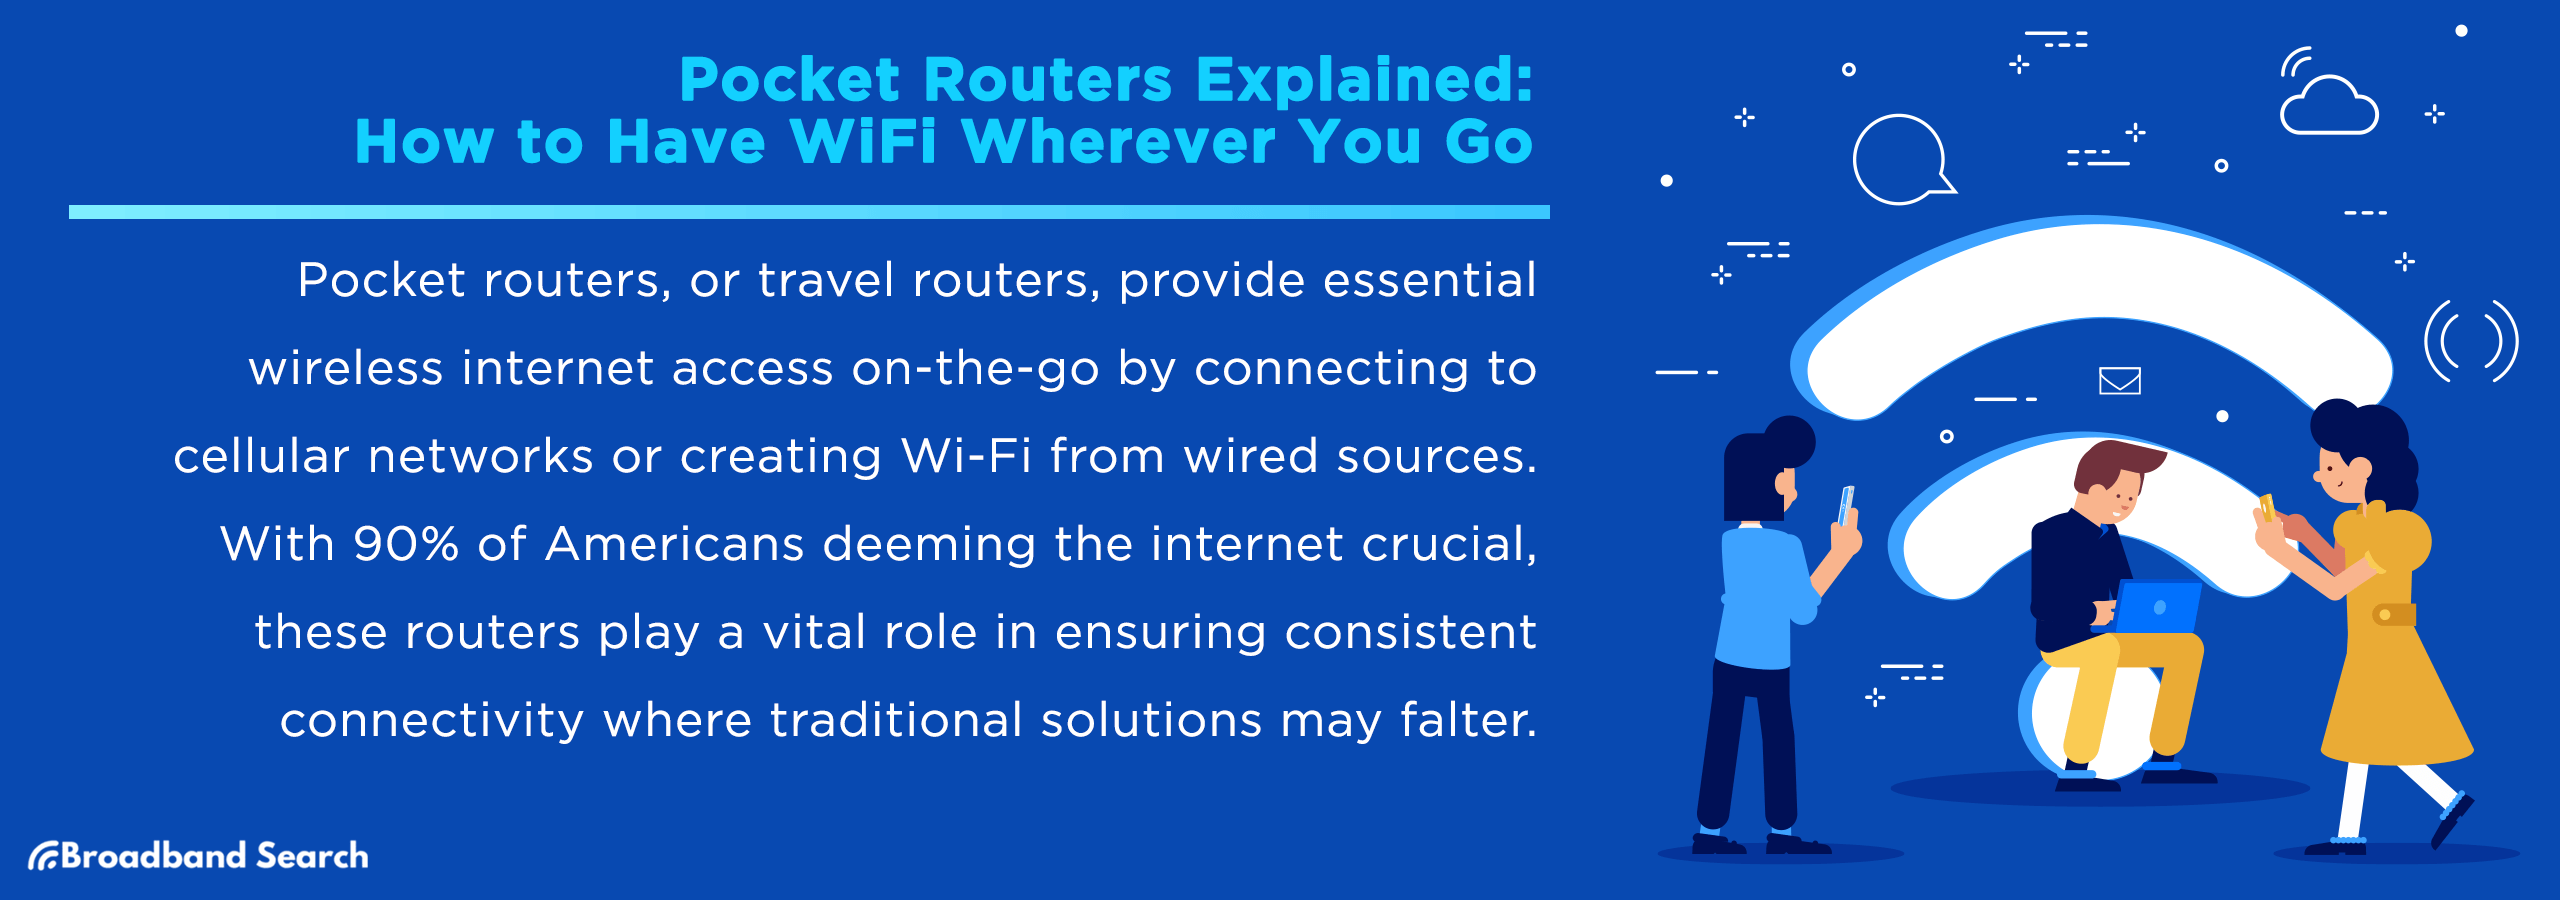 Pocket Router: A Device That Gives You Wi-Fi Anywhere